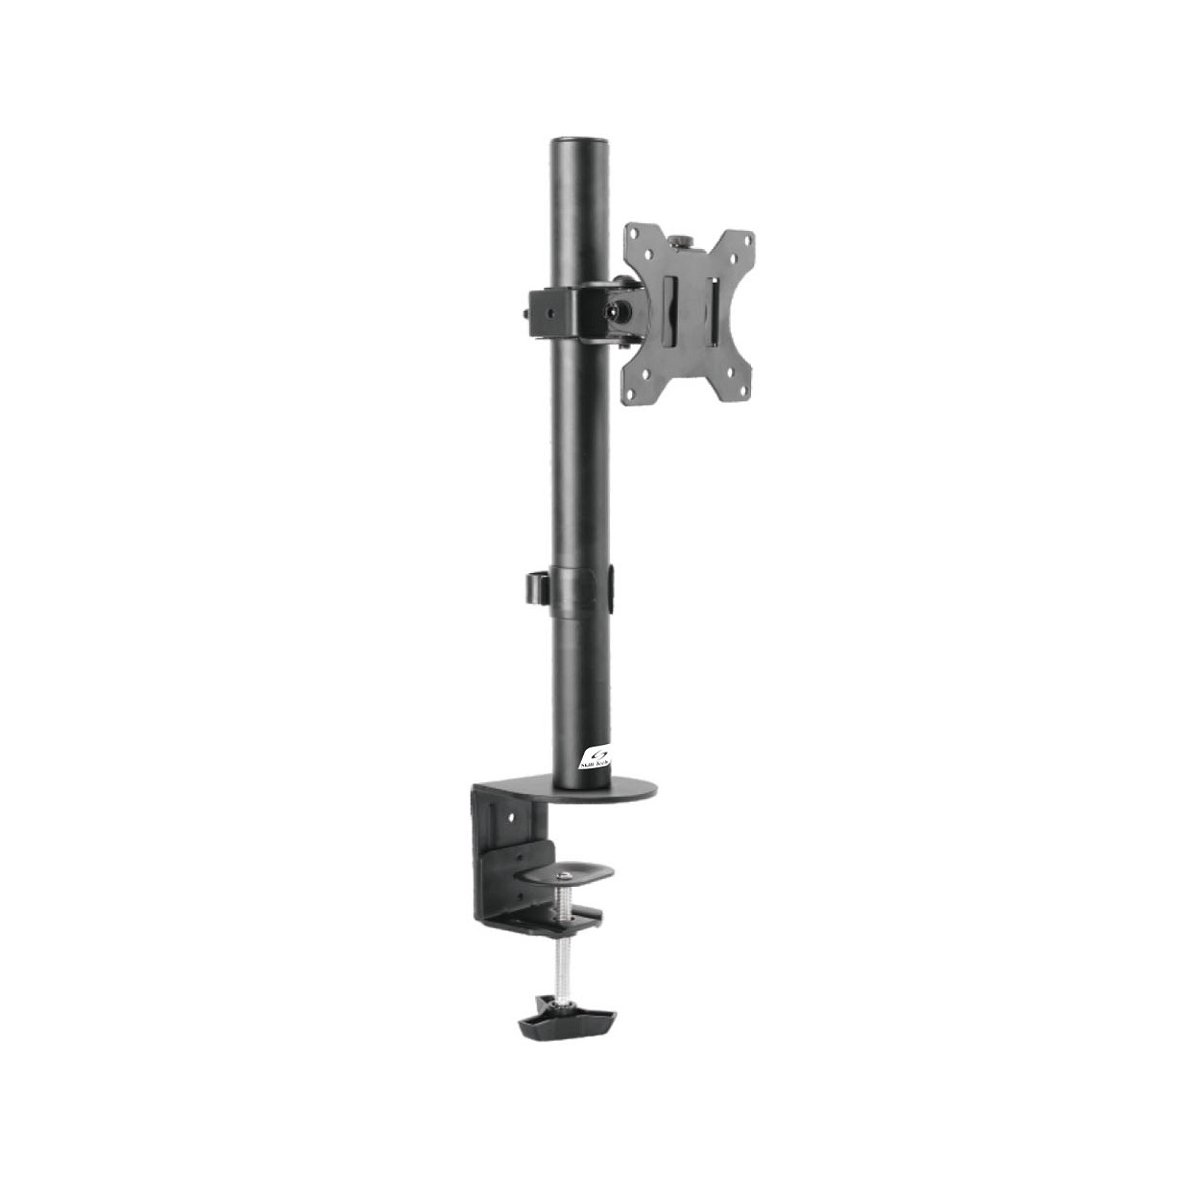 Single-monitor steel articulating monitor mount